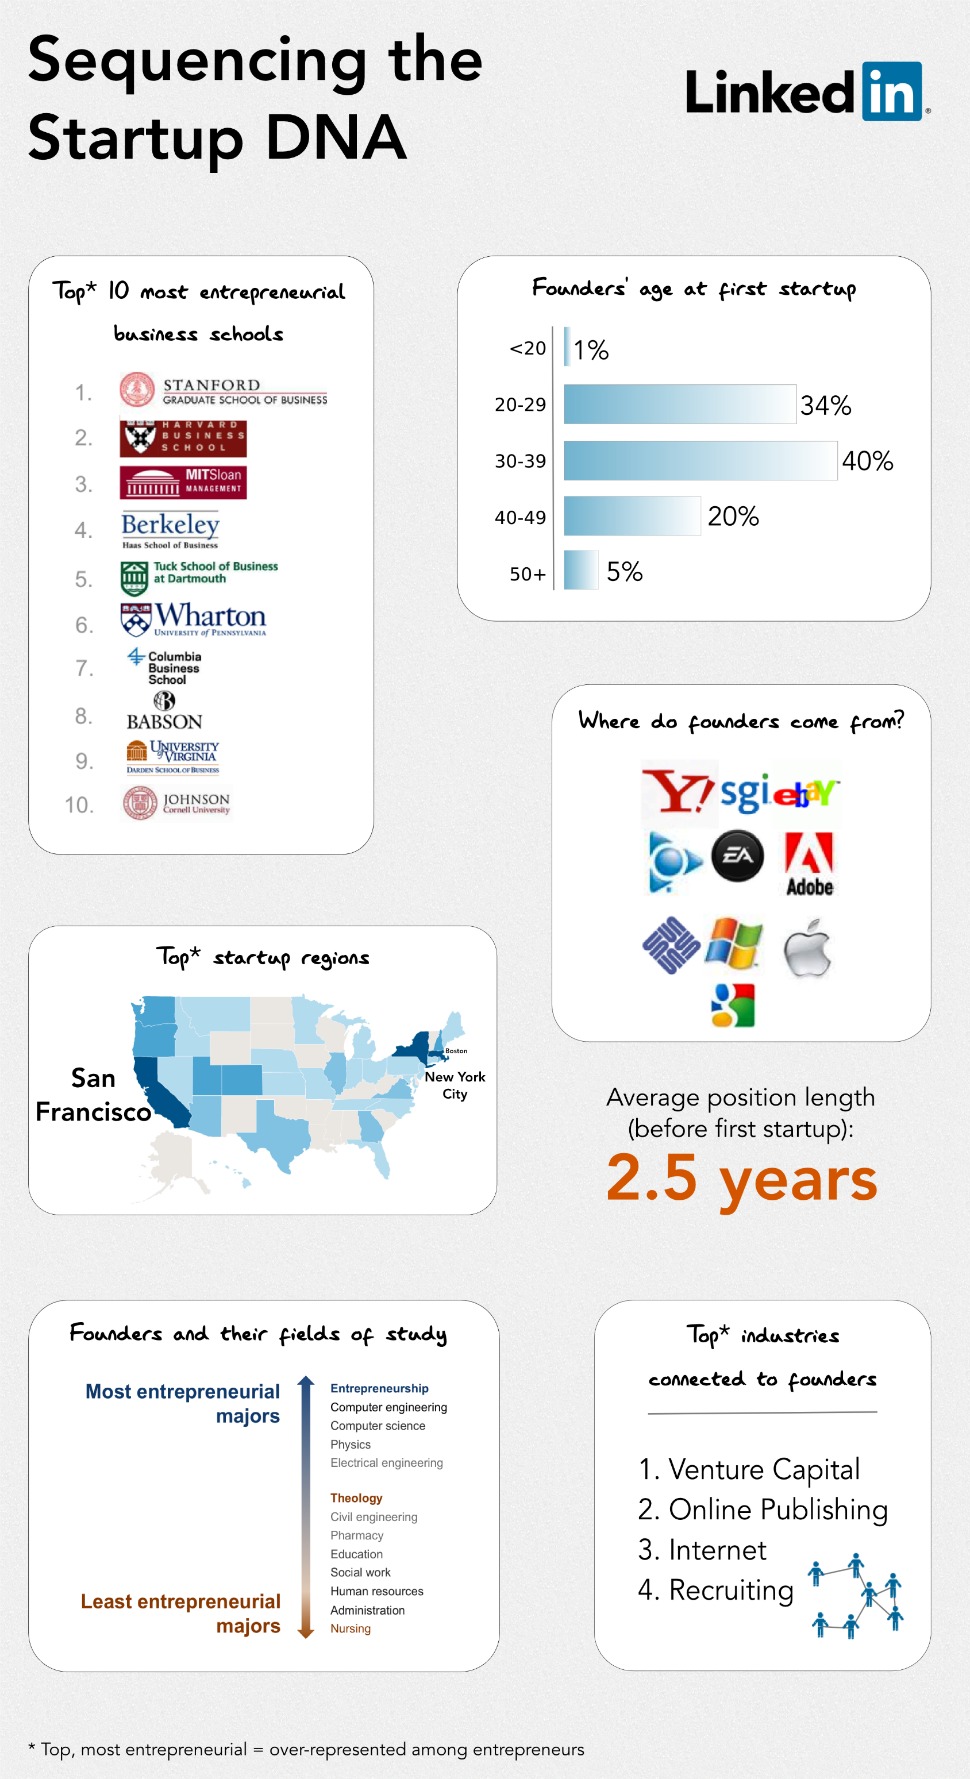 LinkedIn Explores What It Takes To Be an Entrepreneur [INFOGRAPHIC]